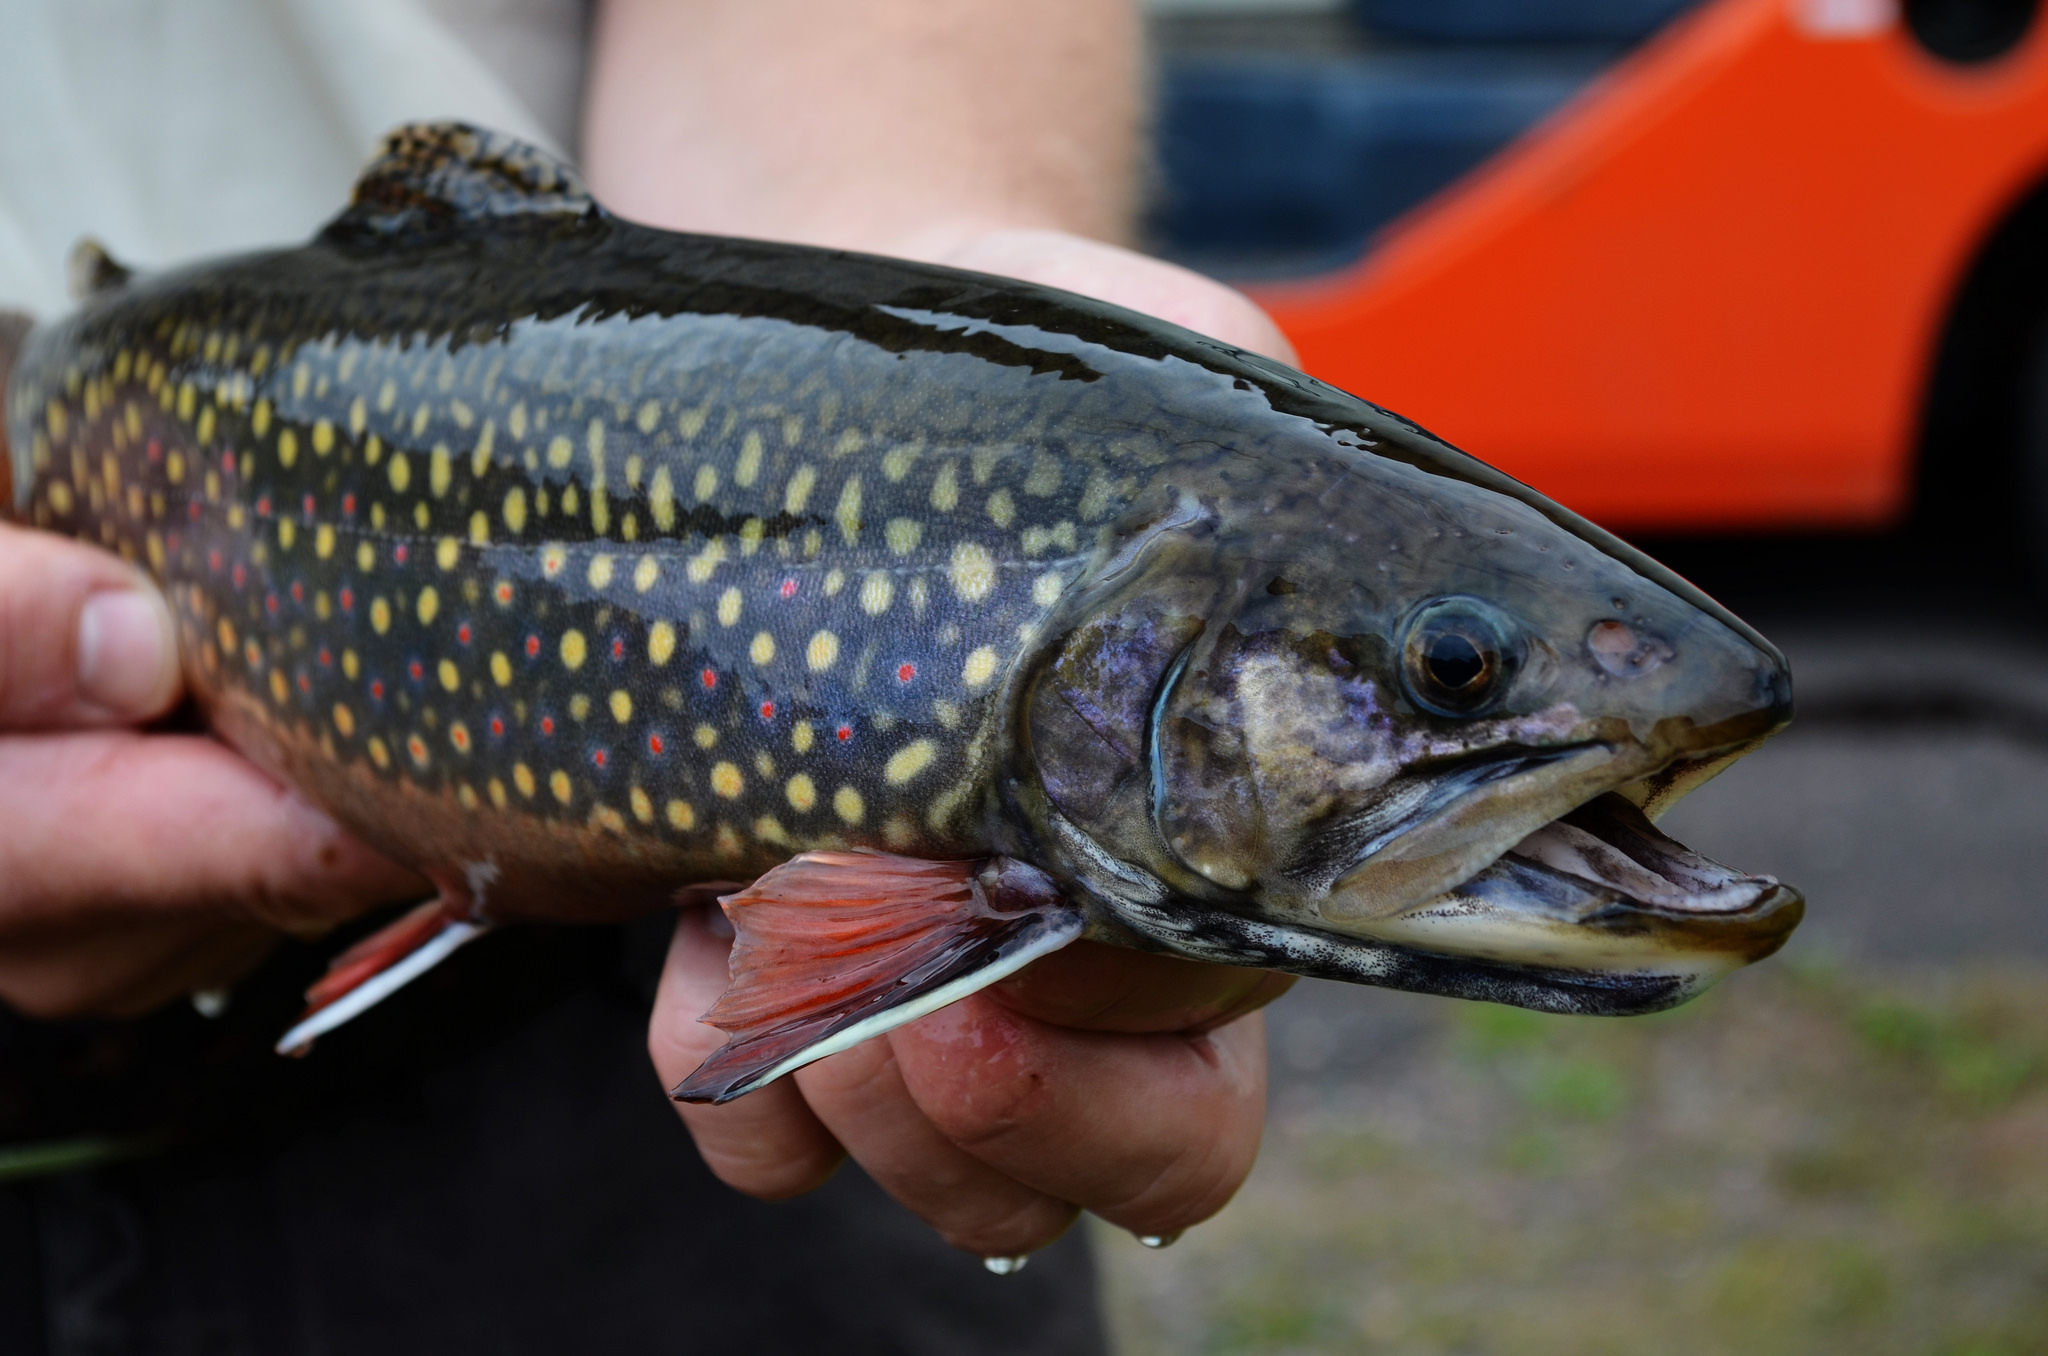 Parasite known to cause disease found for the first time in wild Wisconsin trout